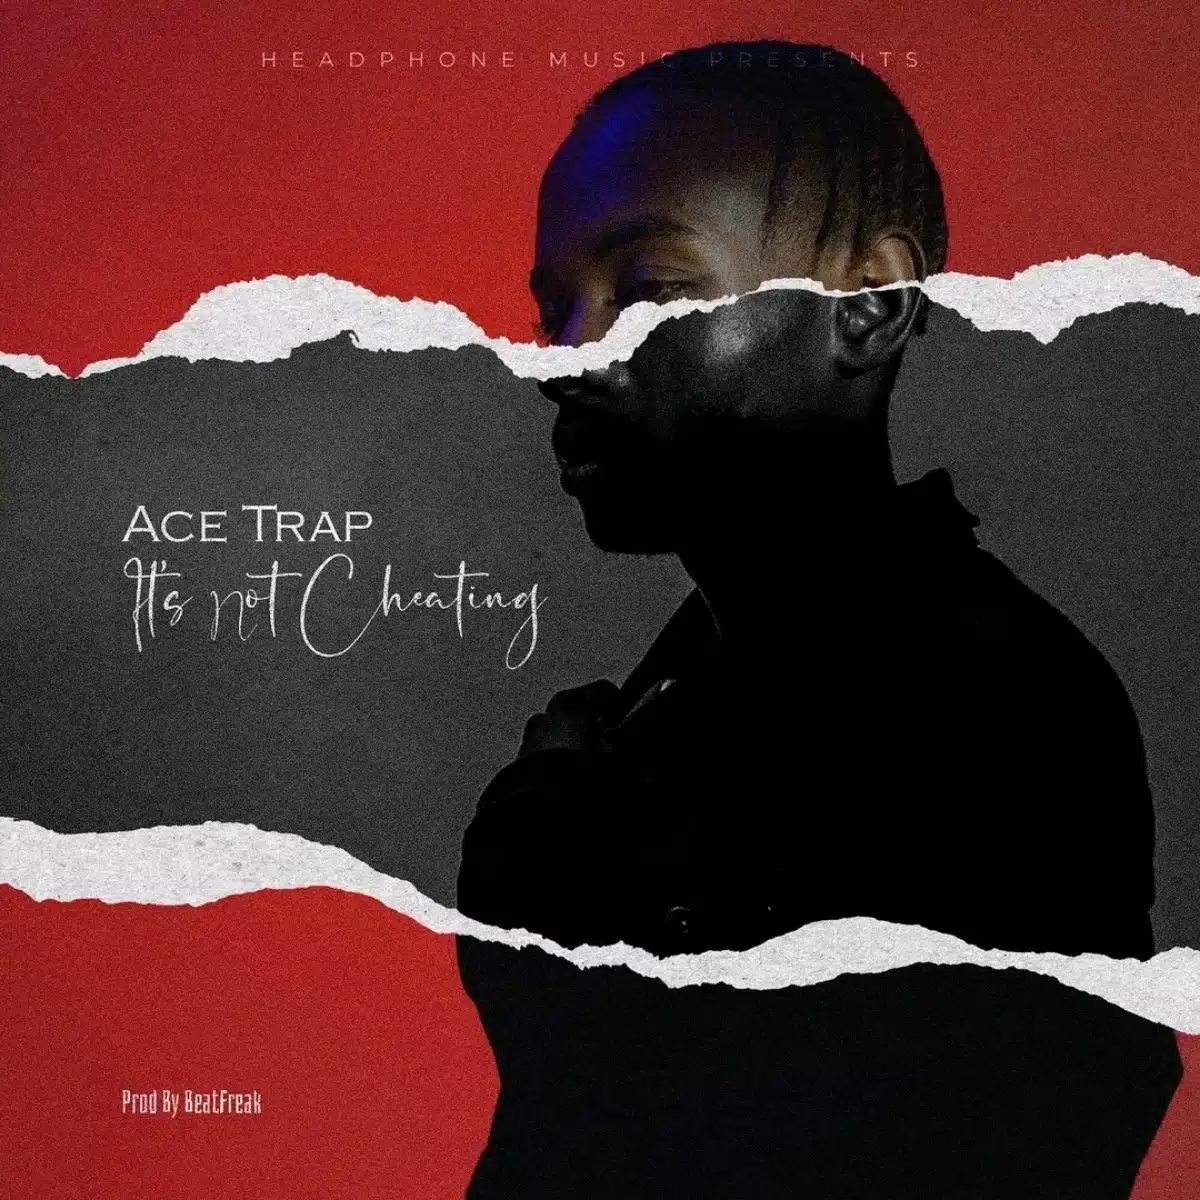 DOWNLOAD: Ace Trap – “It’s Not Cheating” Mp3